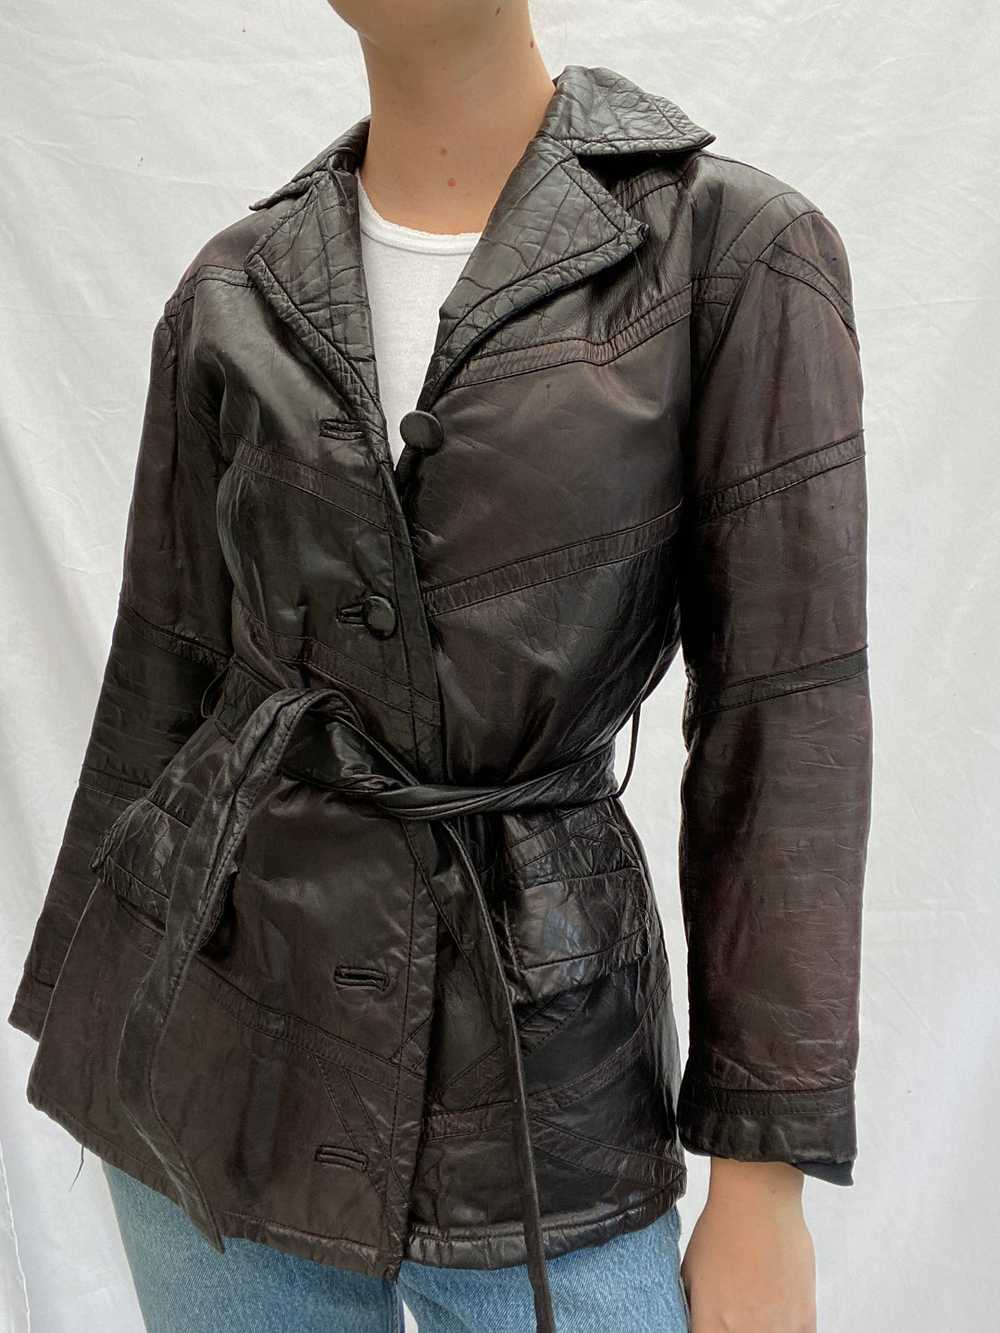 Dark Brown 70's Leather Jacket with Tie - image 1